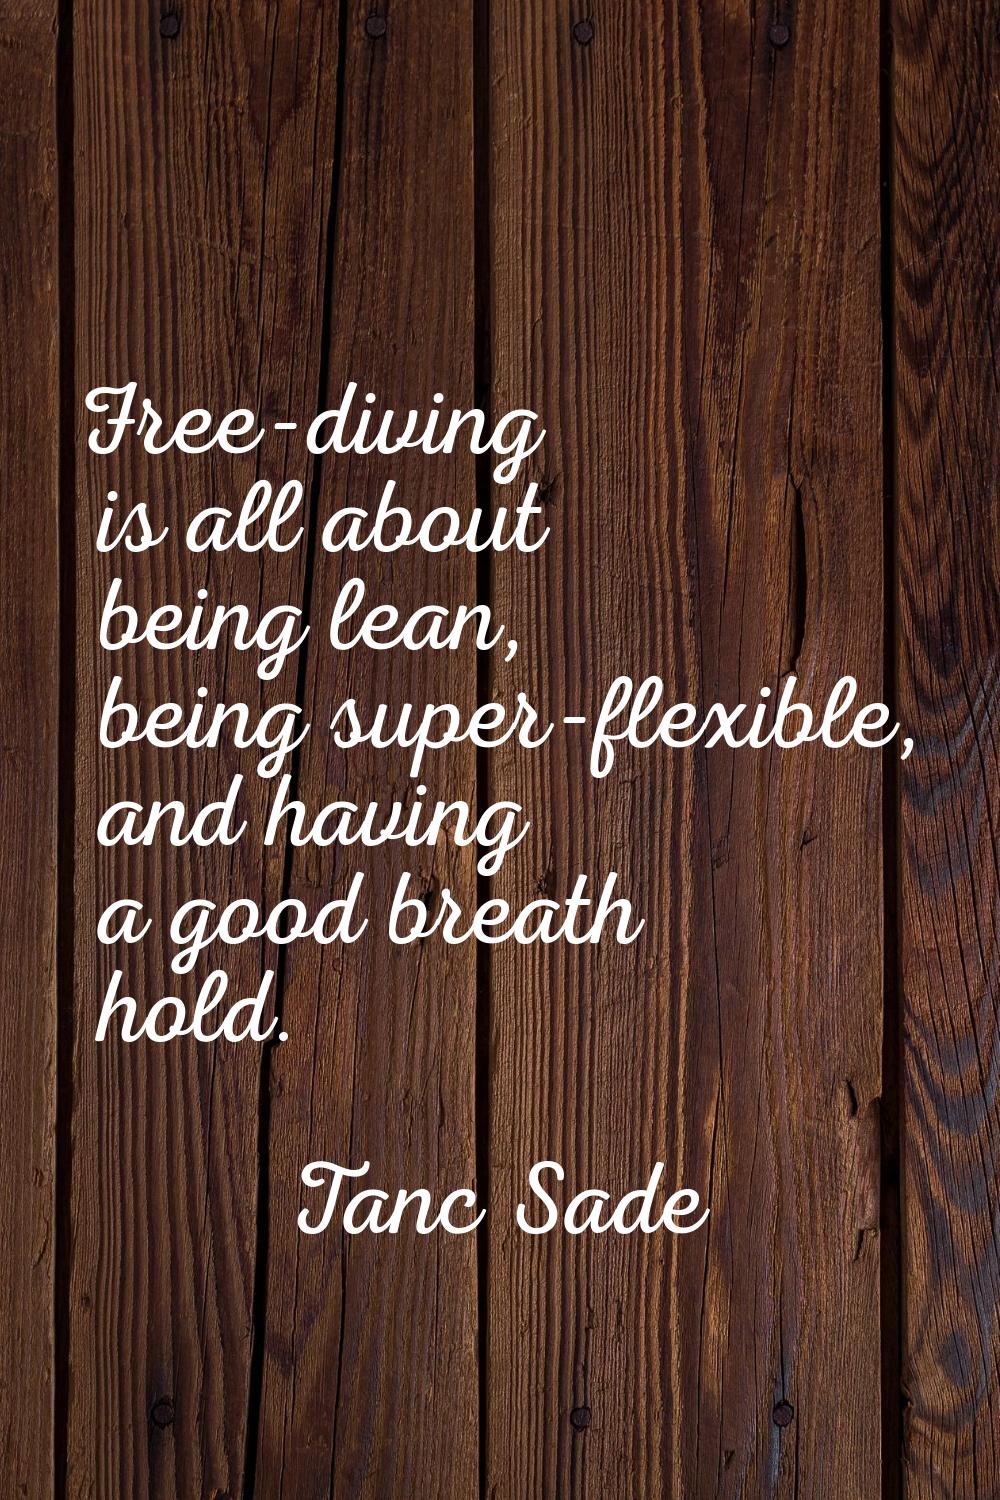 Free-diving is all about being lean, being super-flexible, and having a good breath hold.